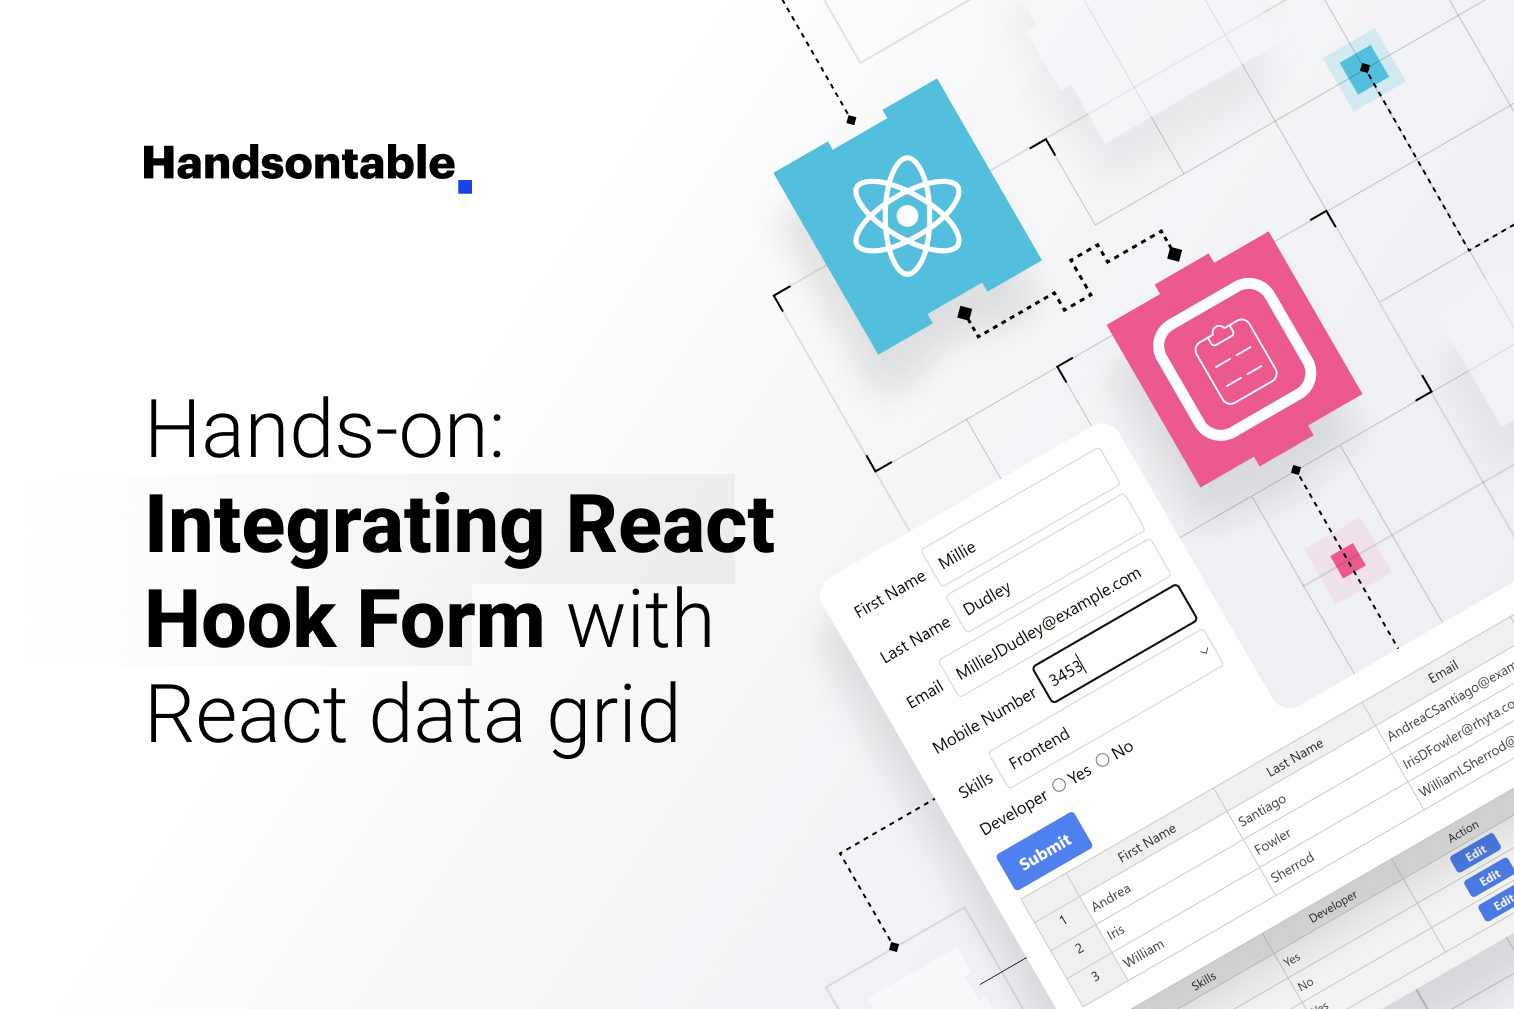 Illustration for a blog post - Hands-on: Integrating React Hook Form with React data grid